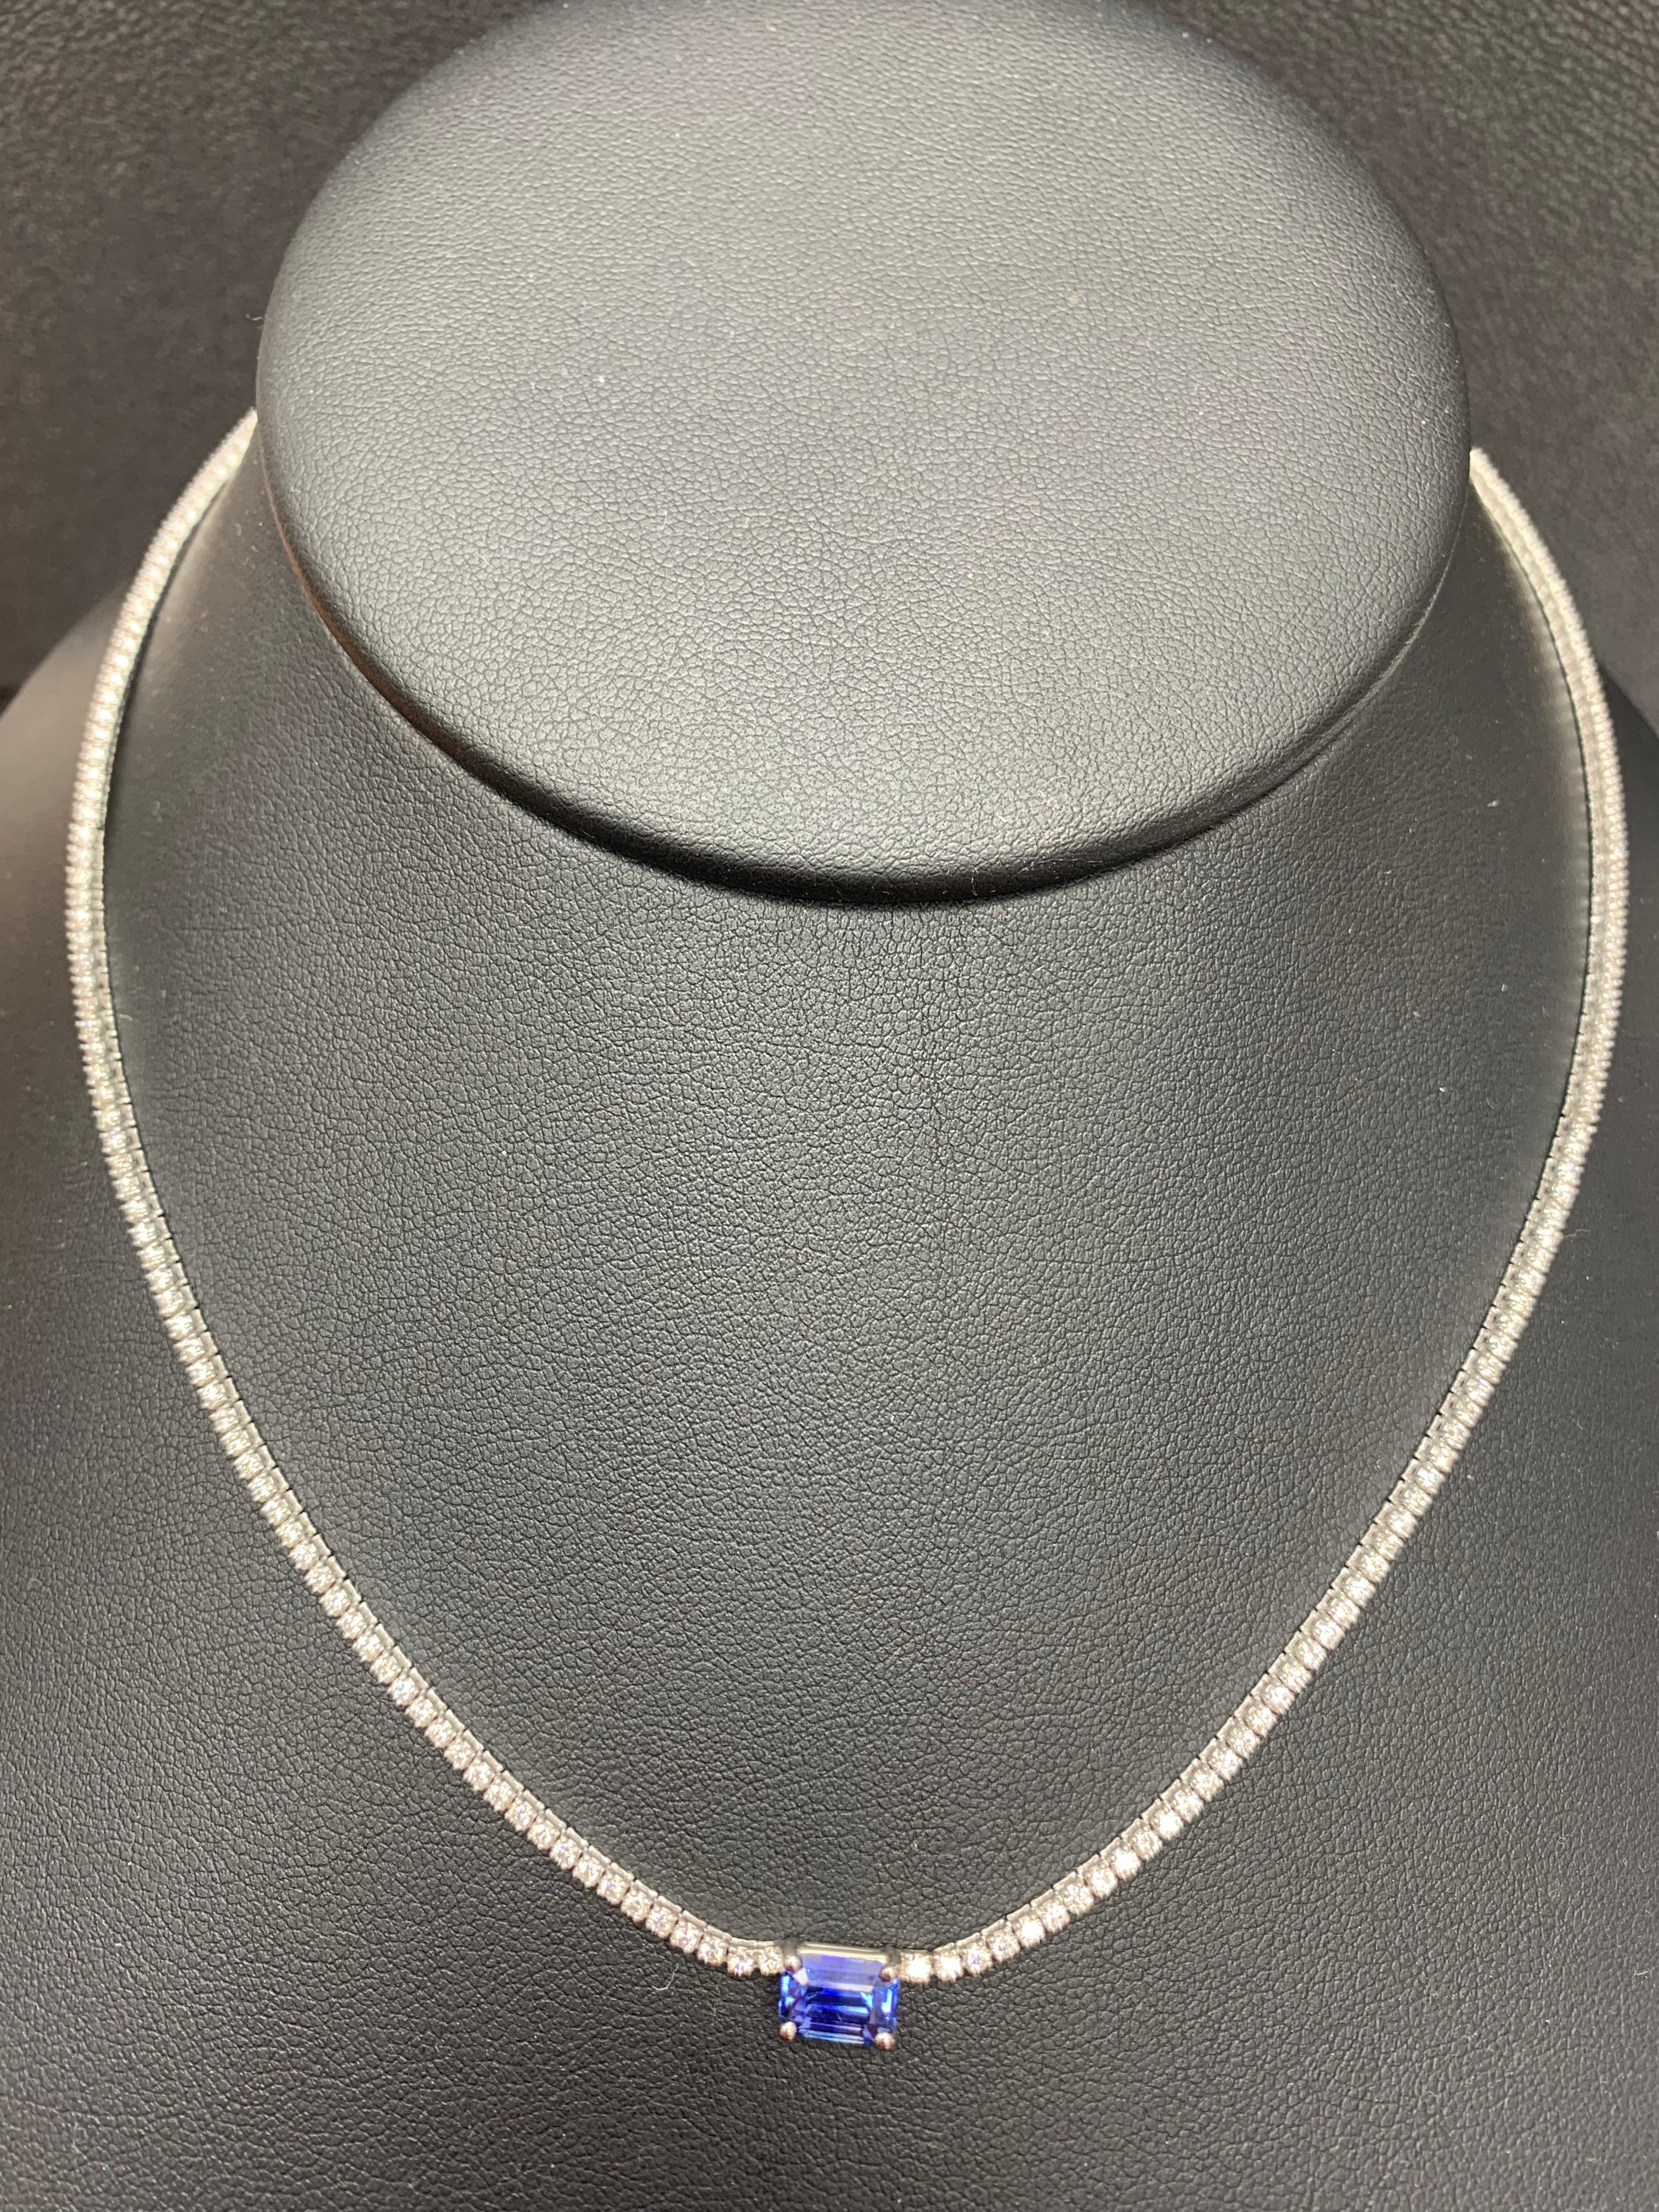 Modern 1.18 Carat Emerald cut Sapphire and Diamond Tennis Necklace in 14K White Gold For Sale